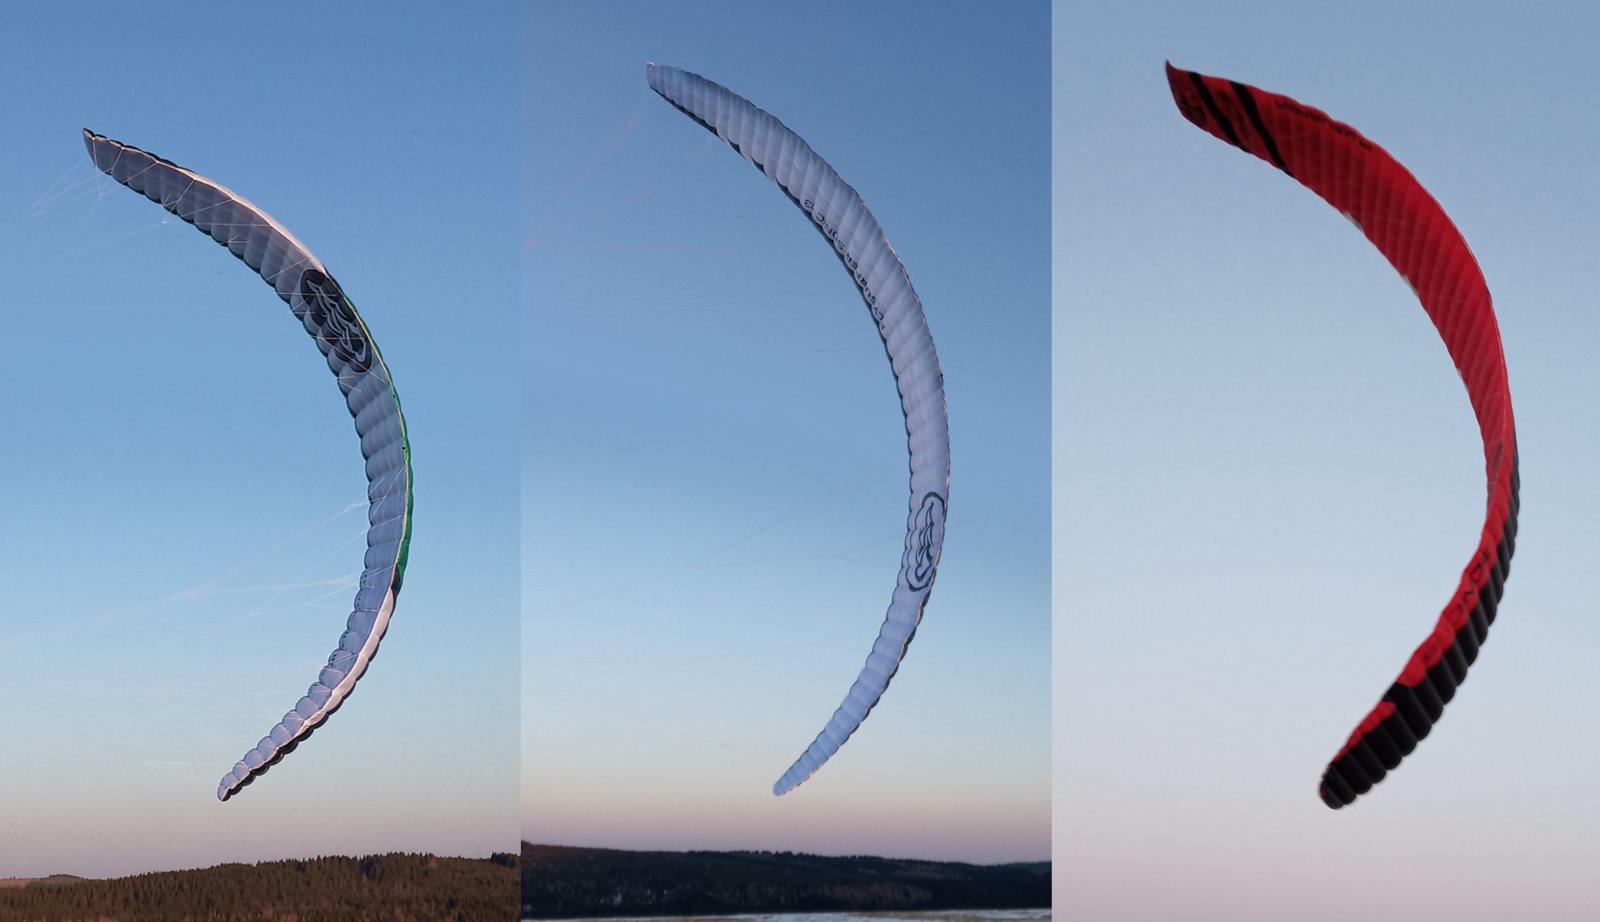 Kite Flysurfer Sonic3 comparation with Sonic2 and Soul - kite shapes